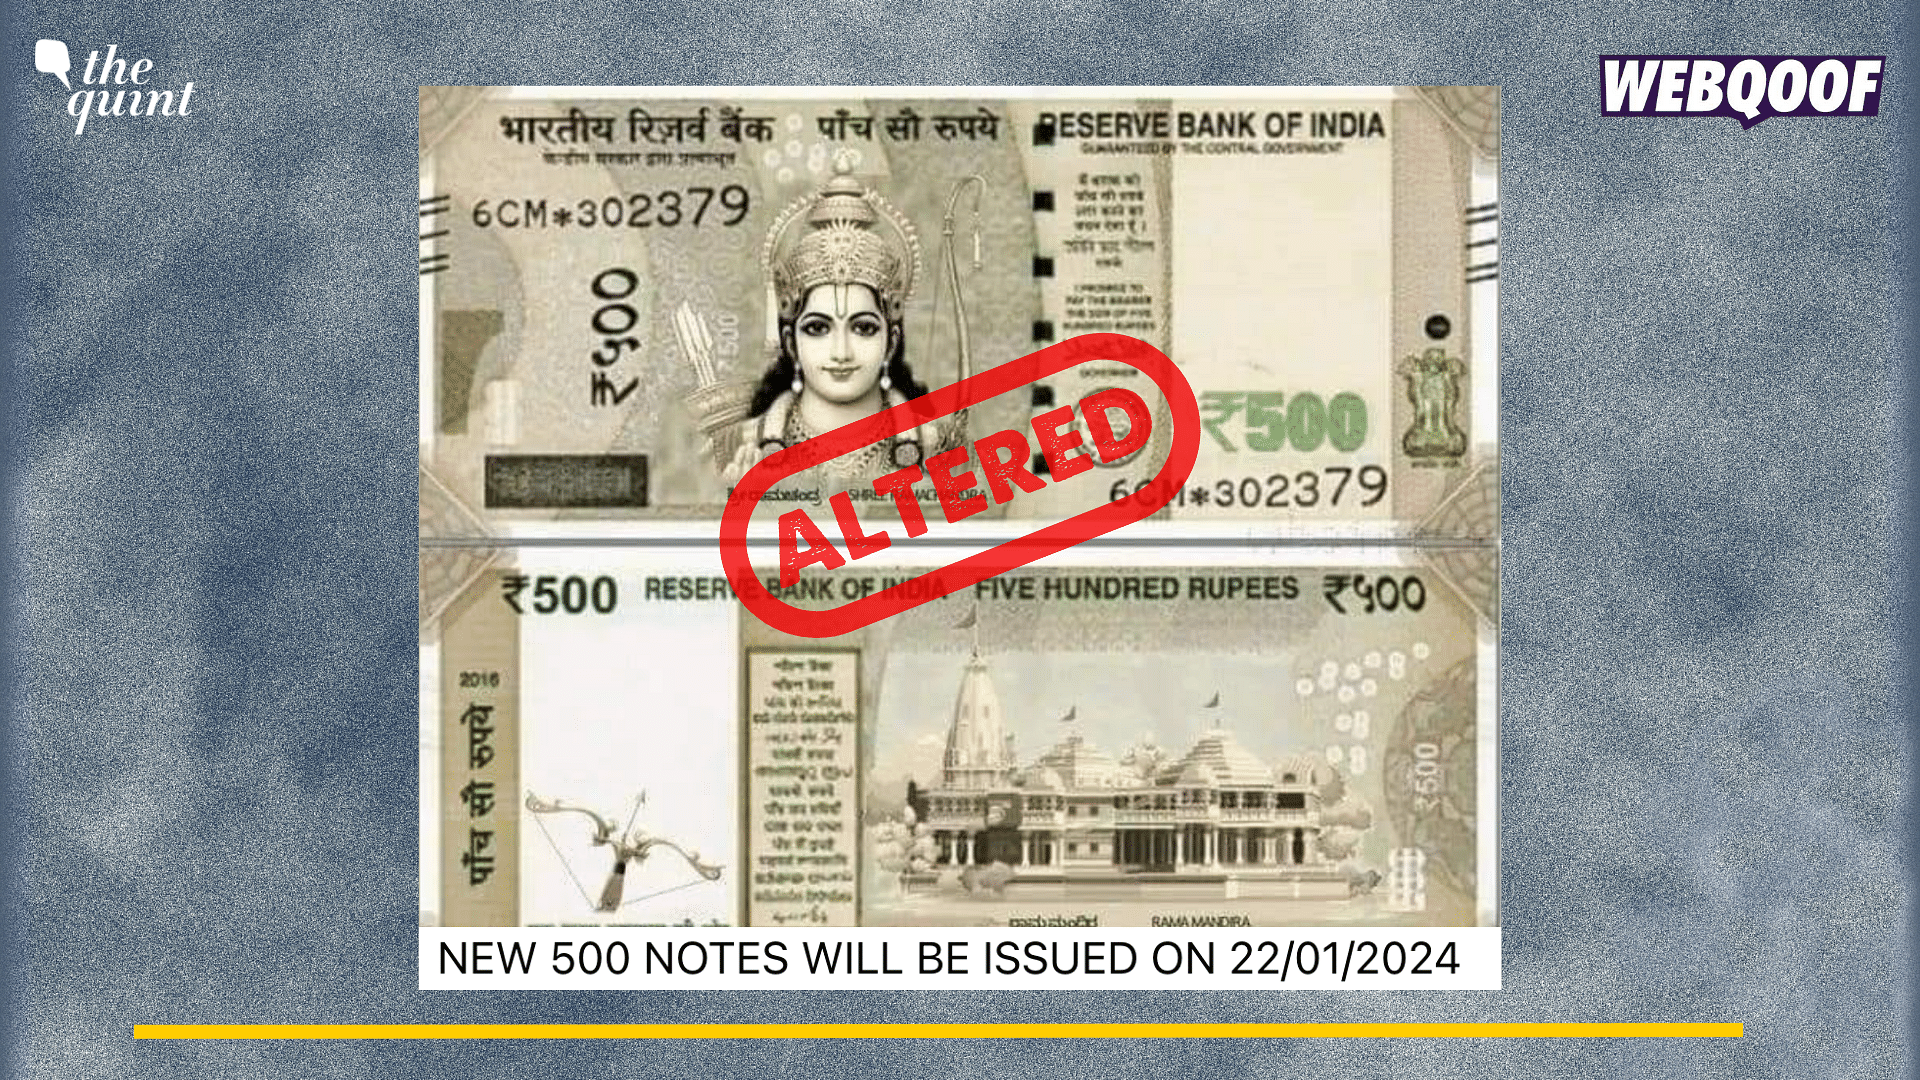 <div class="paragraphs"><p>Fact-Check: This image is altered. No new banknotes are being issued on 22 January.&nbsp;</p></div>